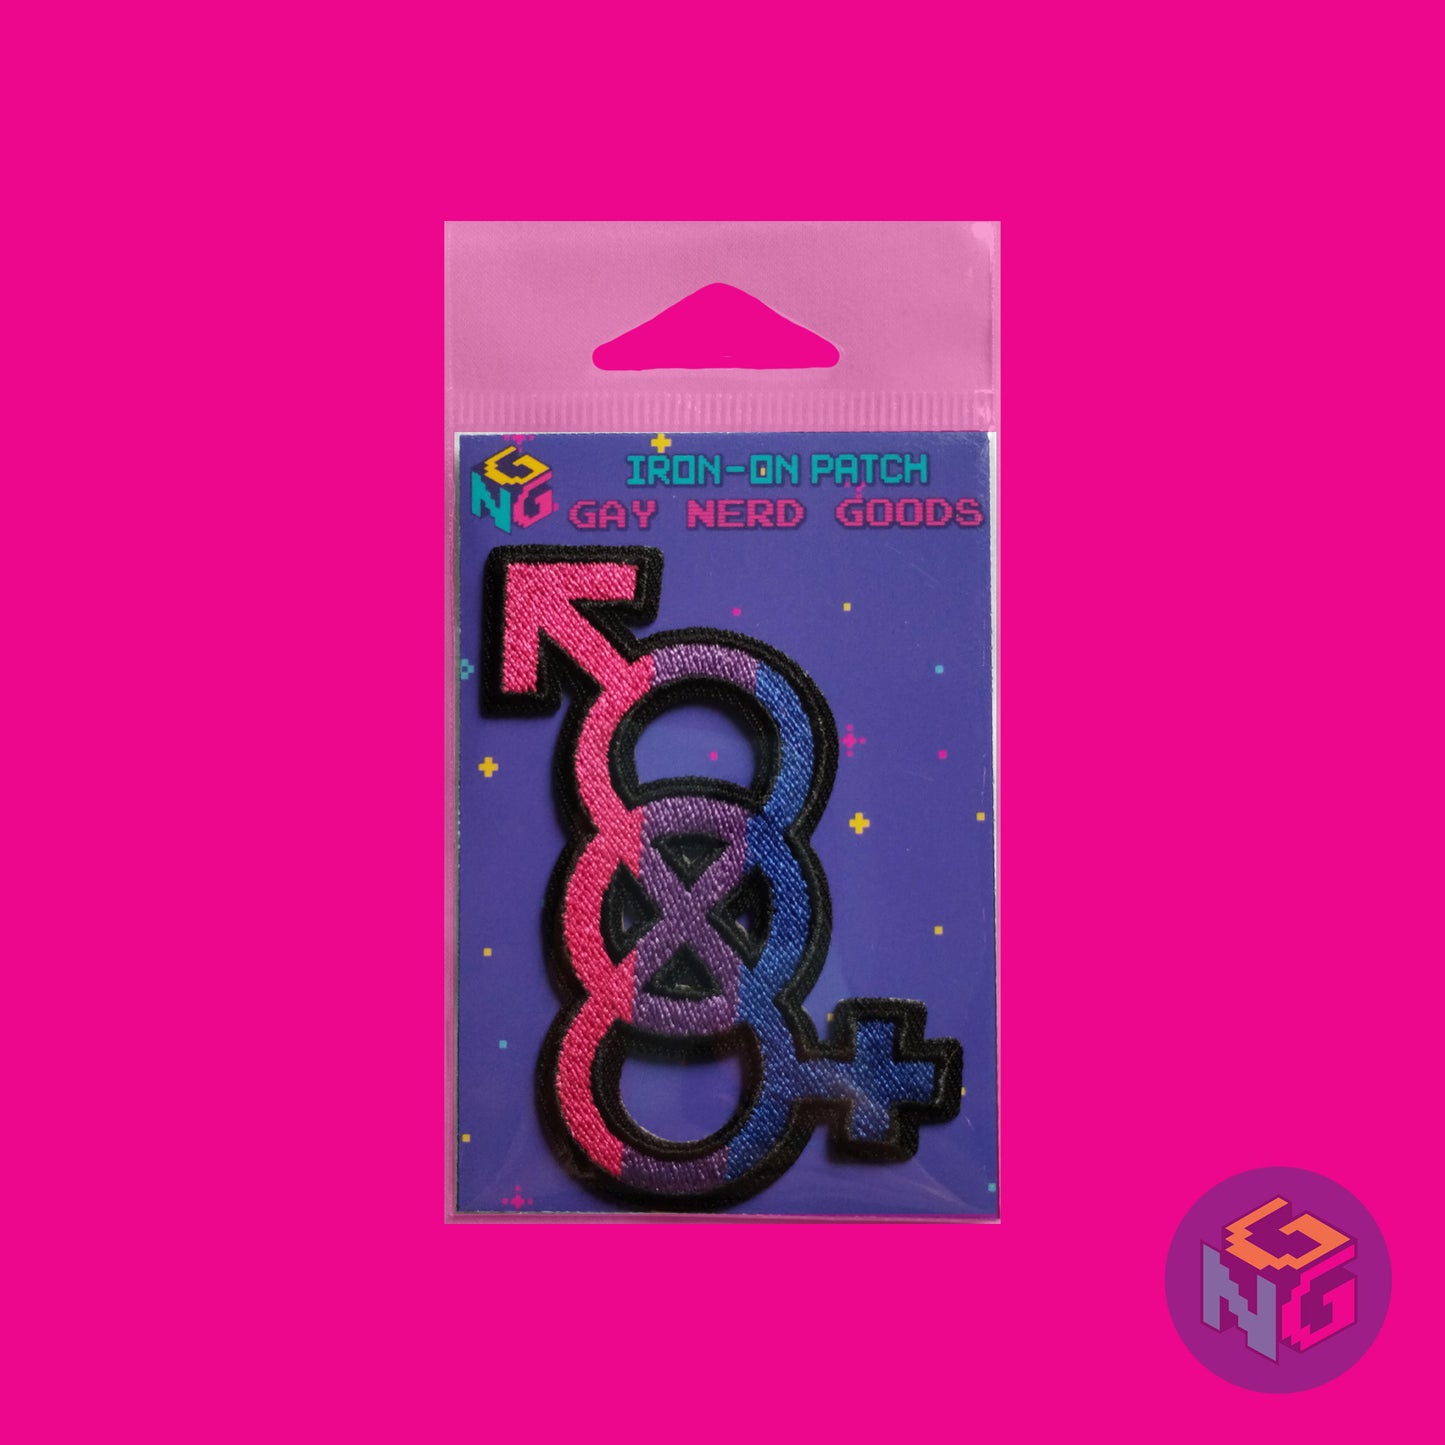 bisexual patch in its packaging on hot pink background